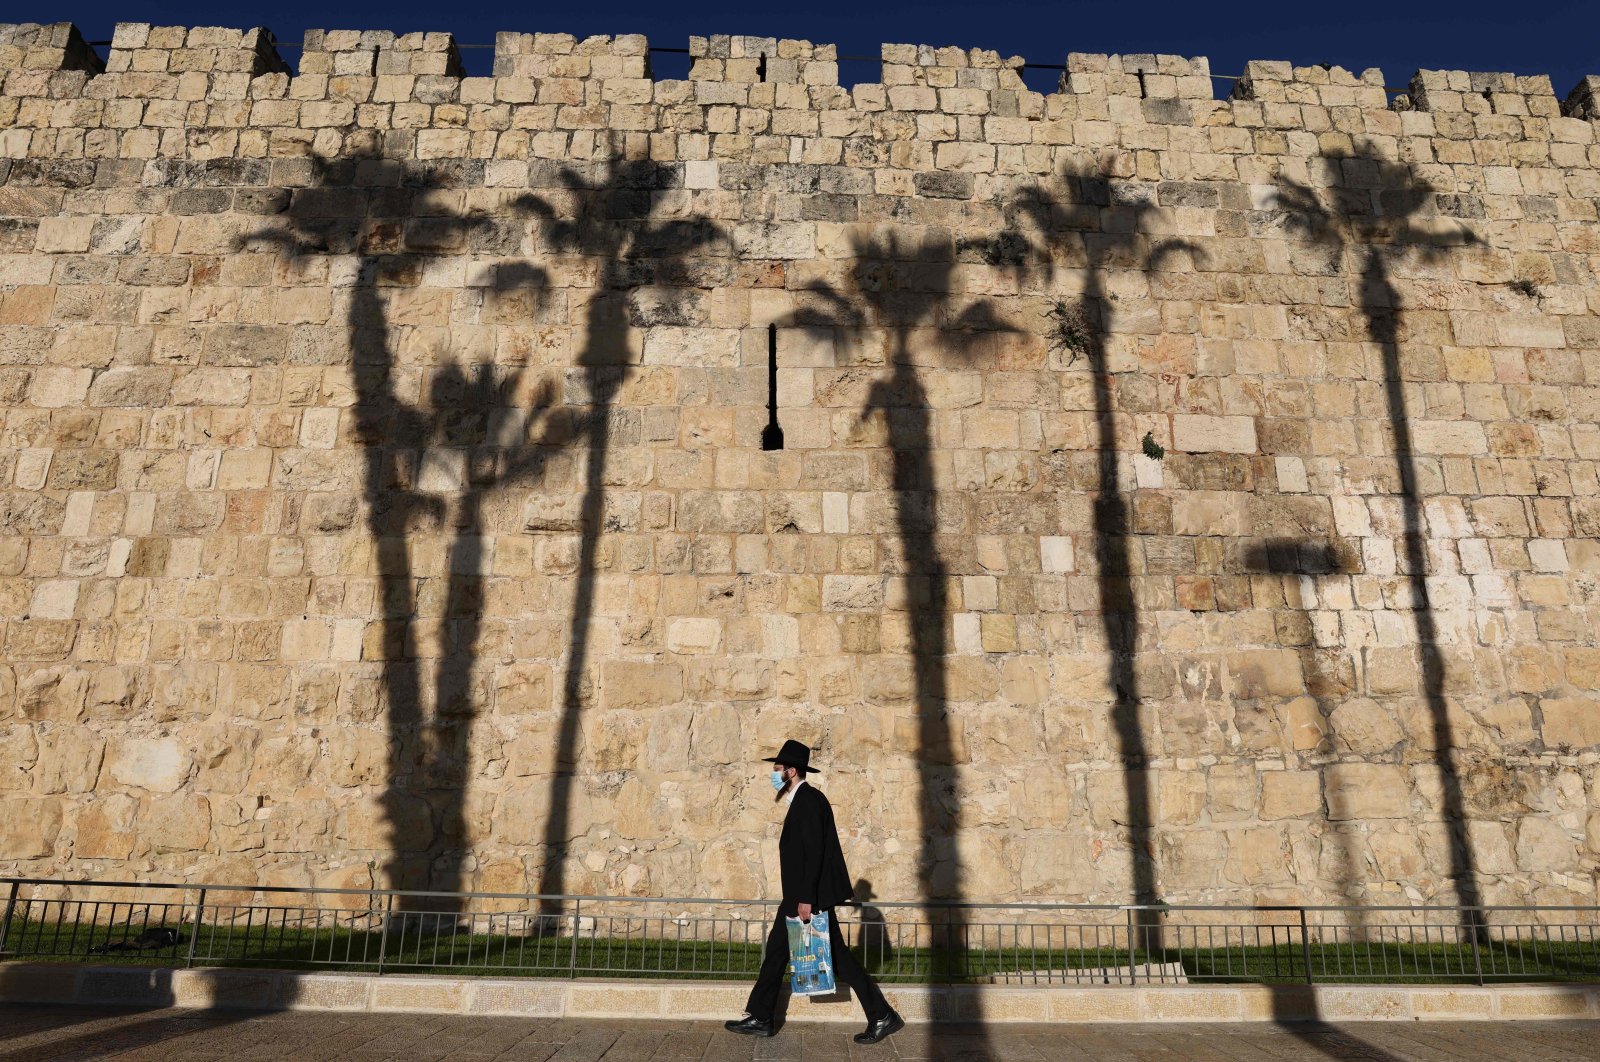 An ultra-Orthodox Jewish man wearing a protective mask due to the COVID-19 pandemic walks along the walls of Jerusalem's Old City on Dec. 10, 2020. (AFP Photo)